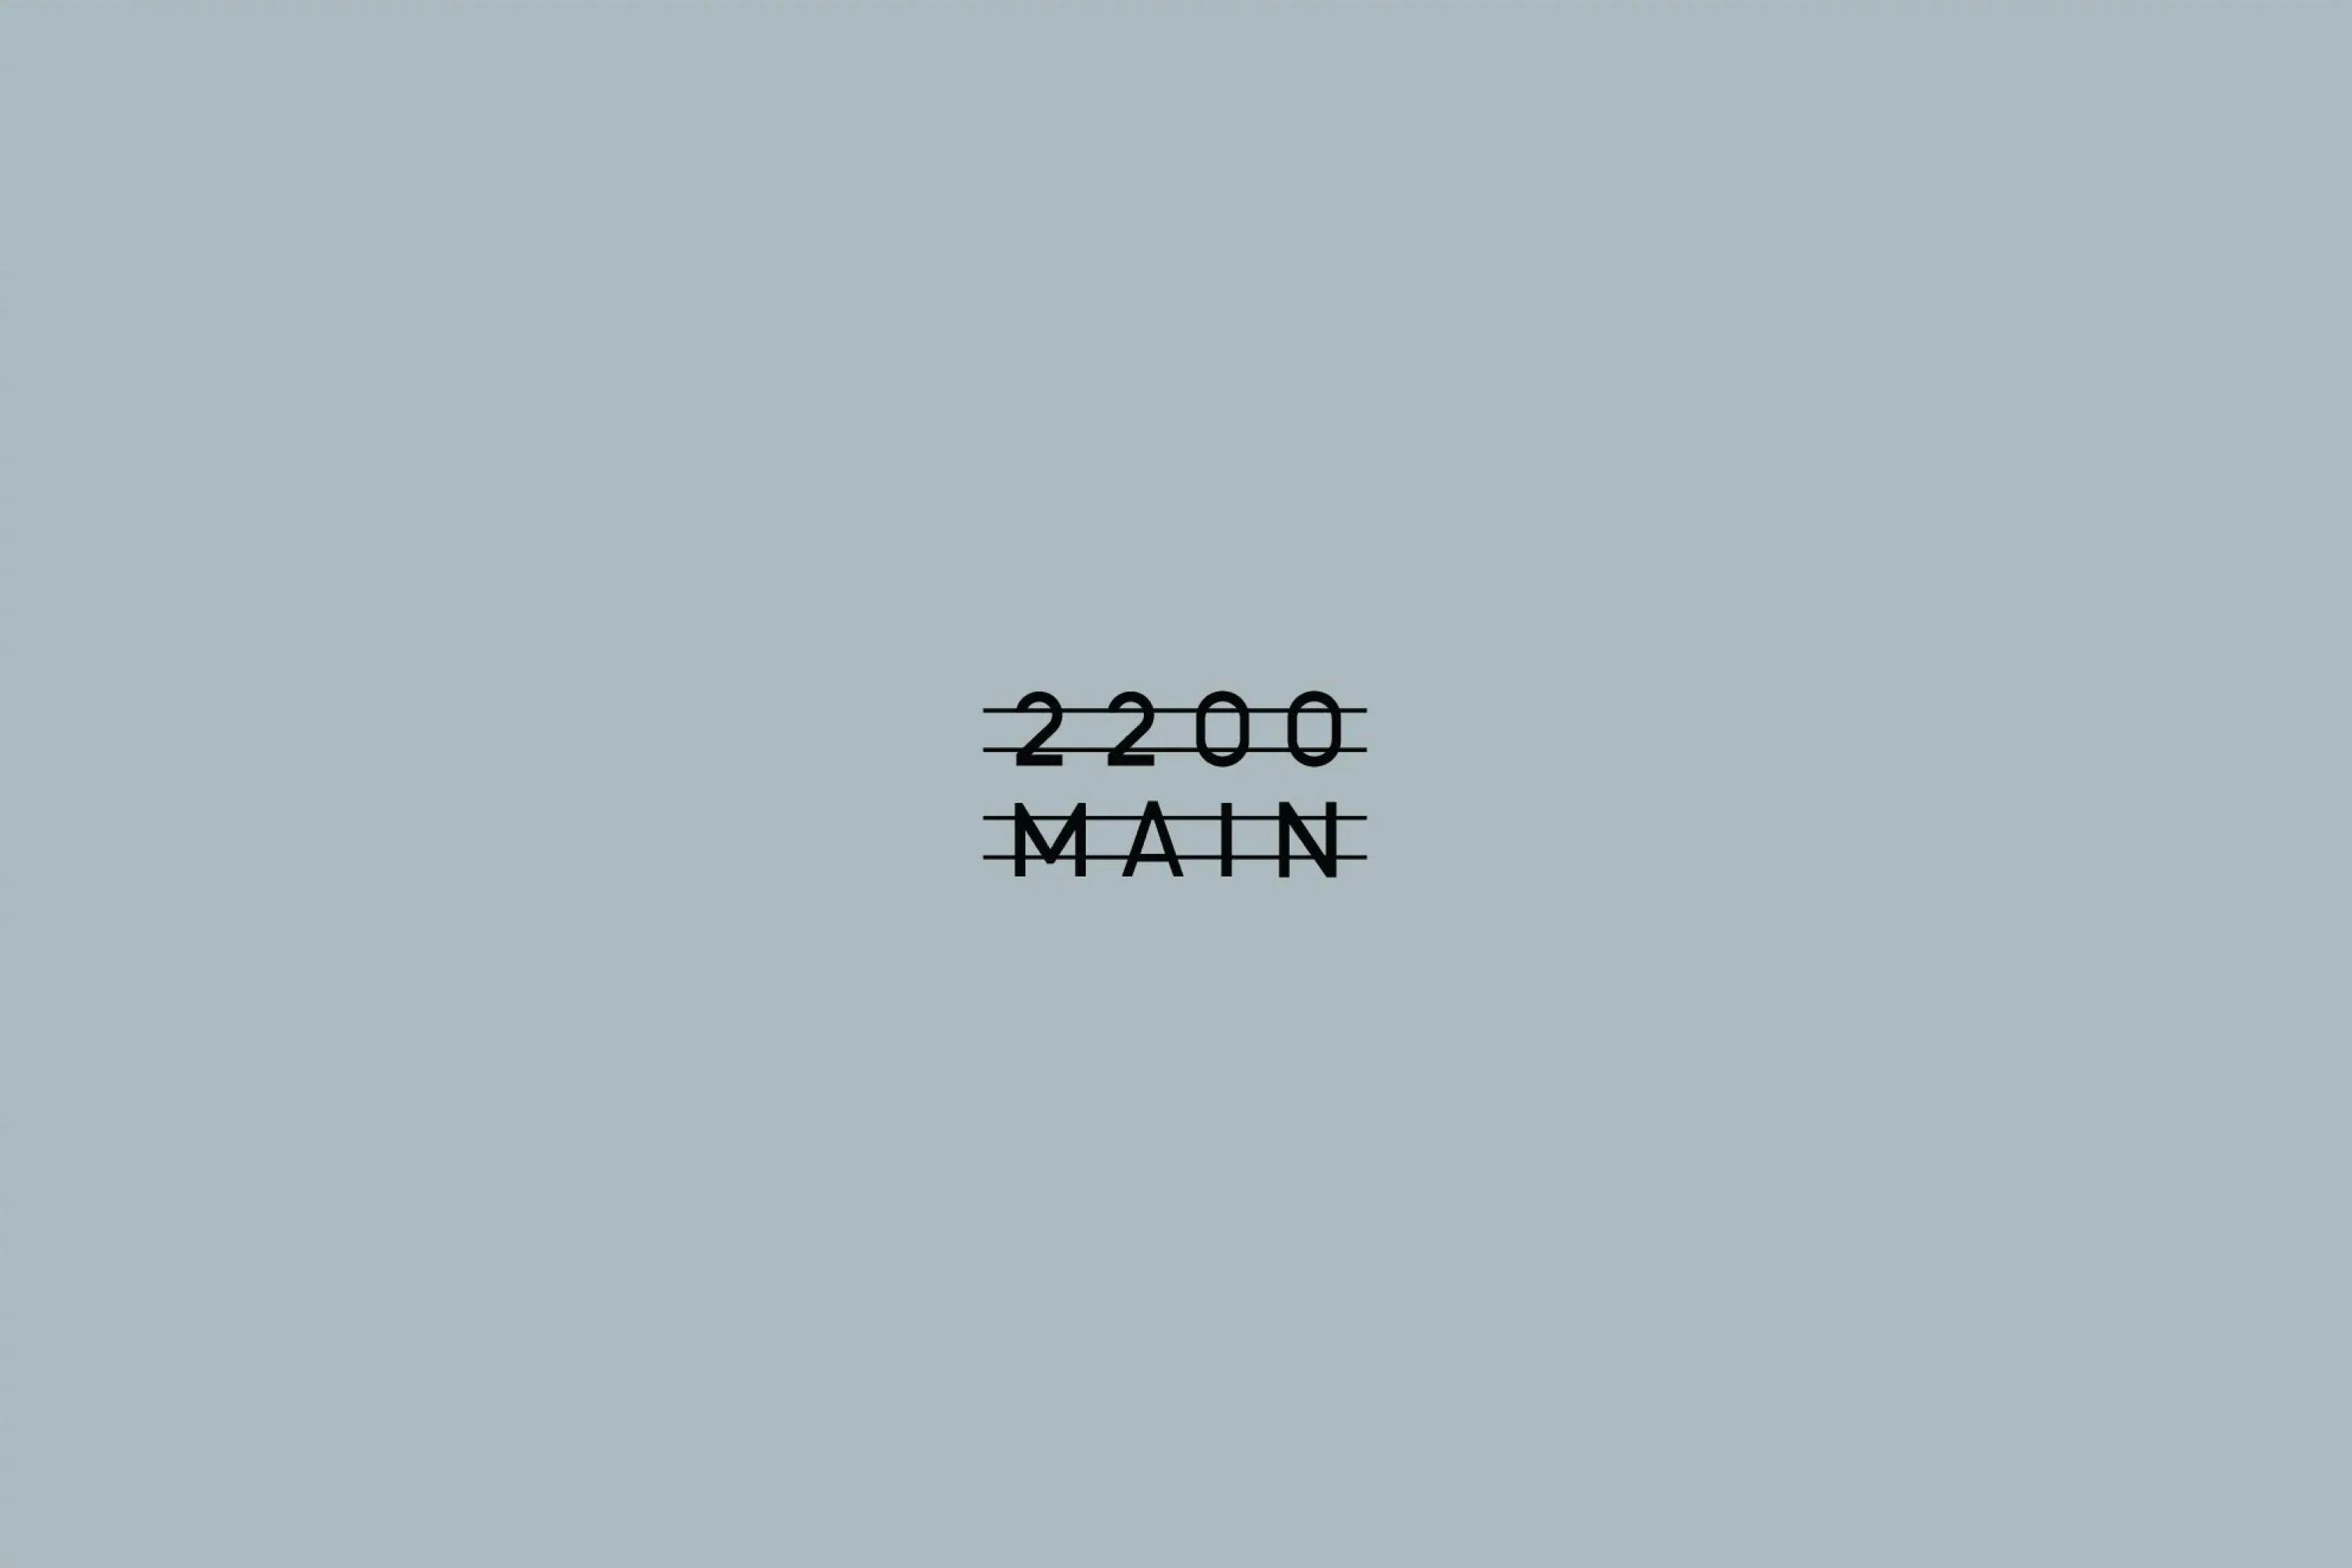 2200 Main written against a gray background